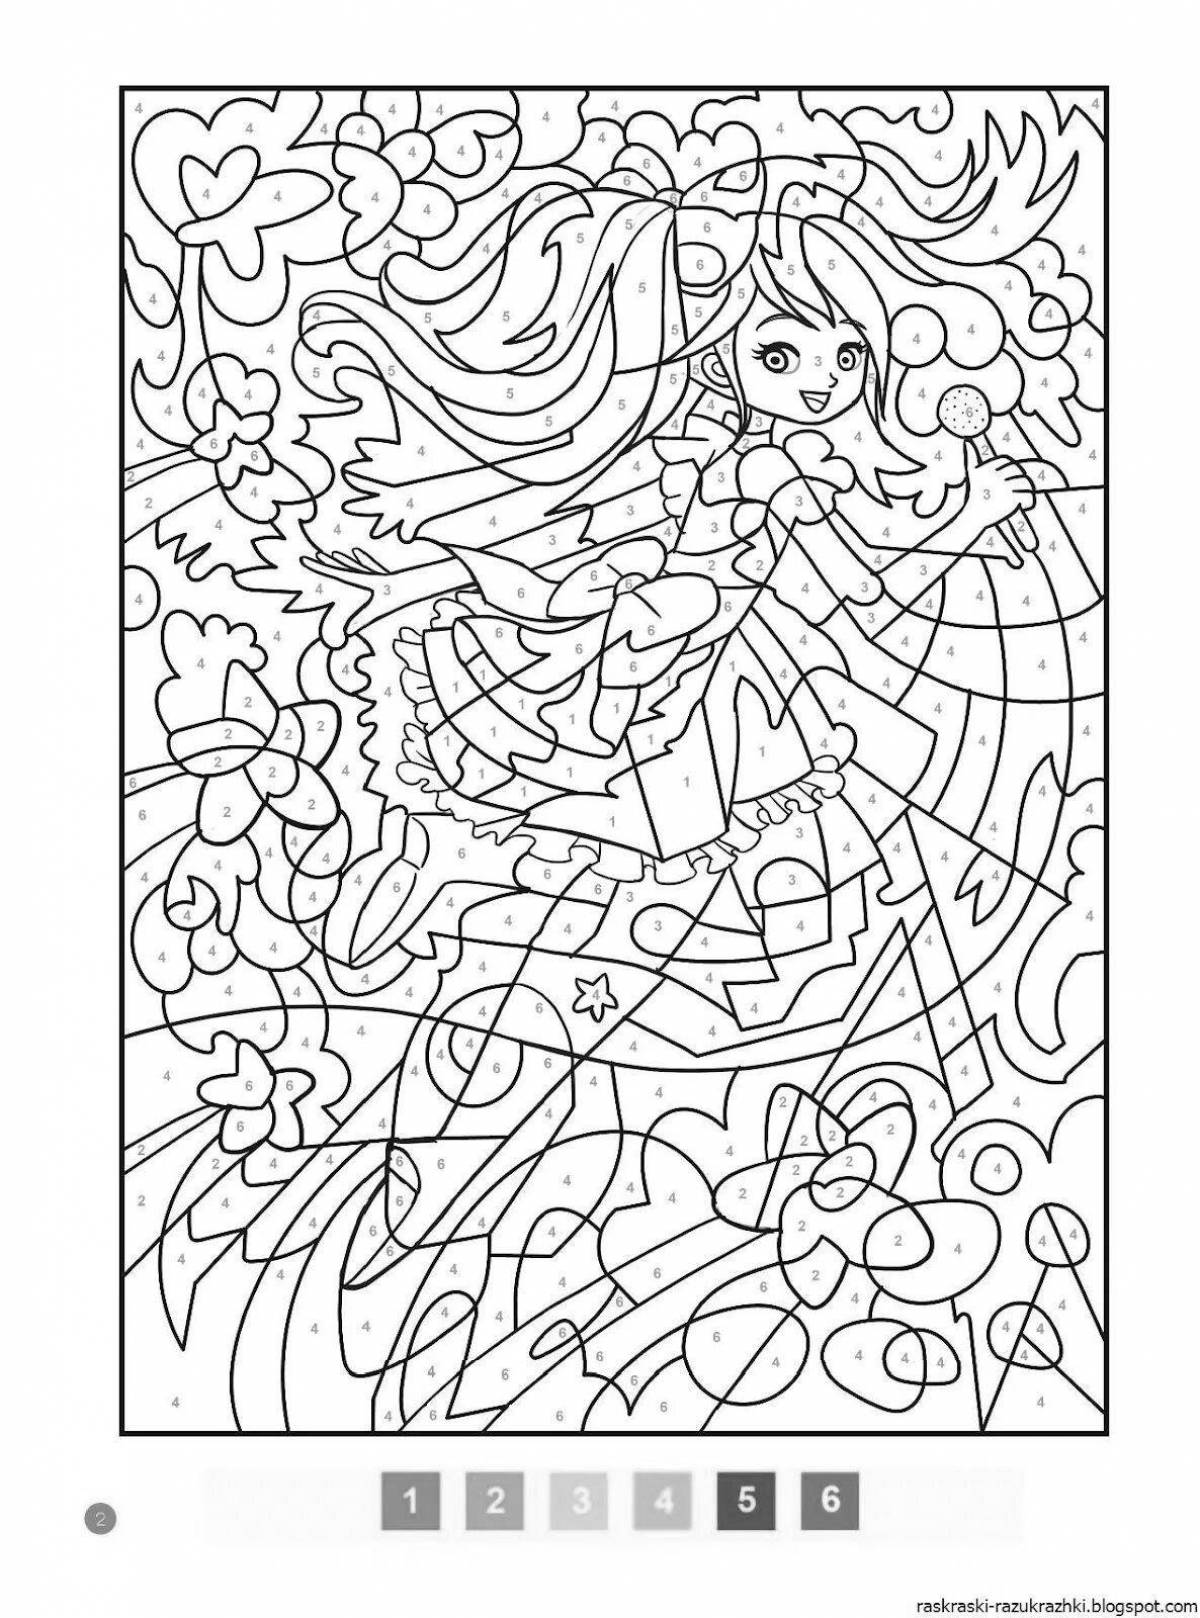 Colored number game coloring book